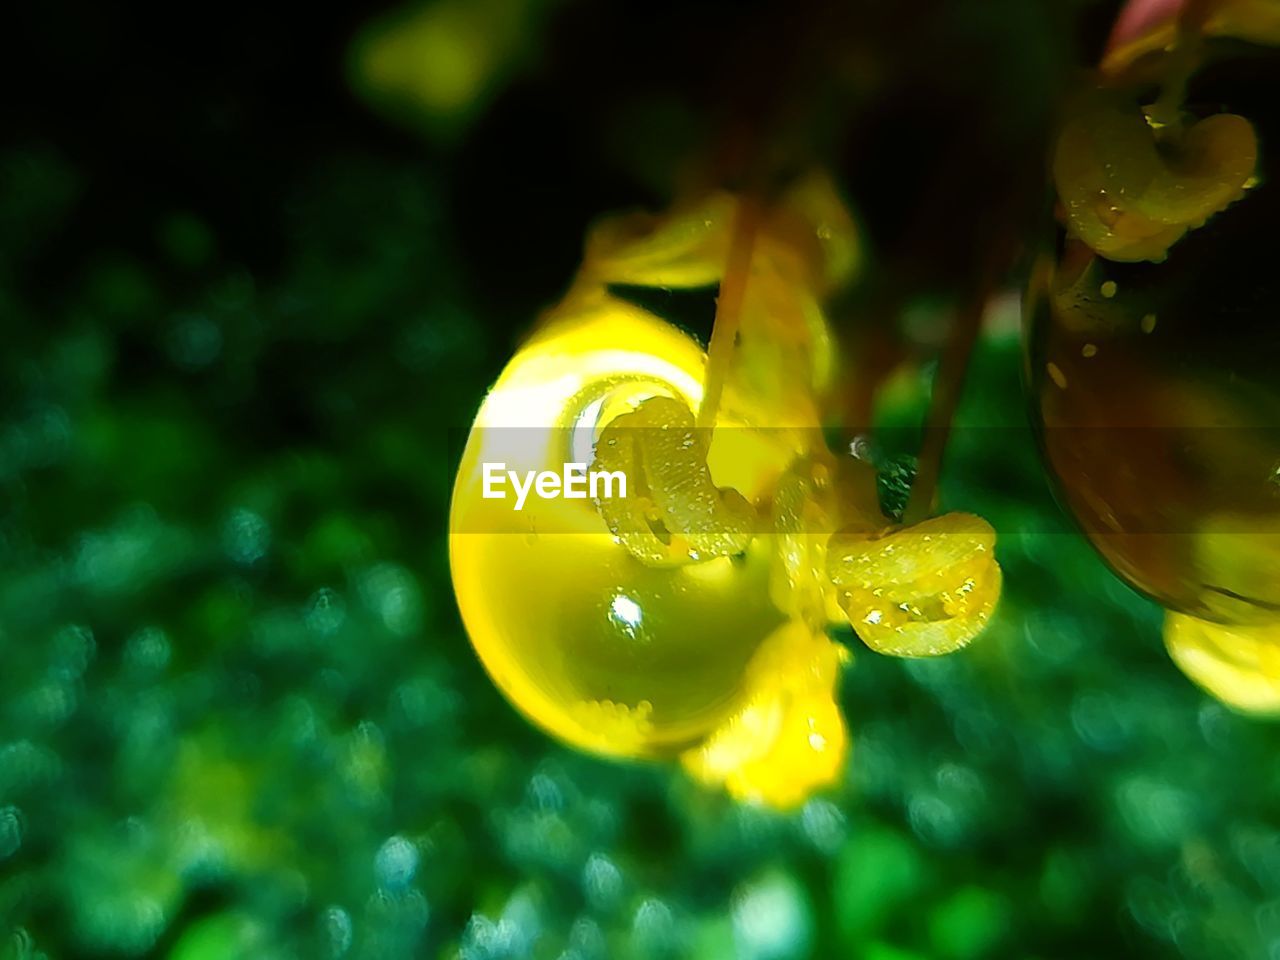 CLOSE-UP OF YELLOW DROP ON PLANT